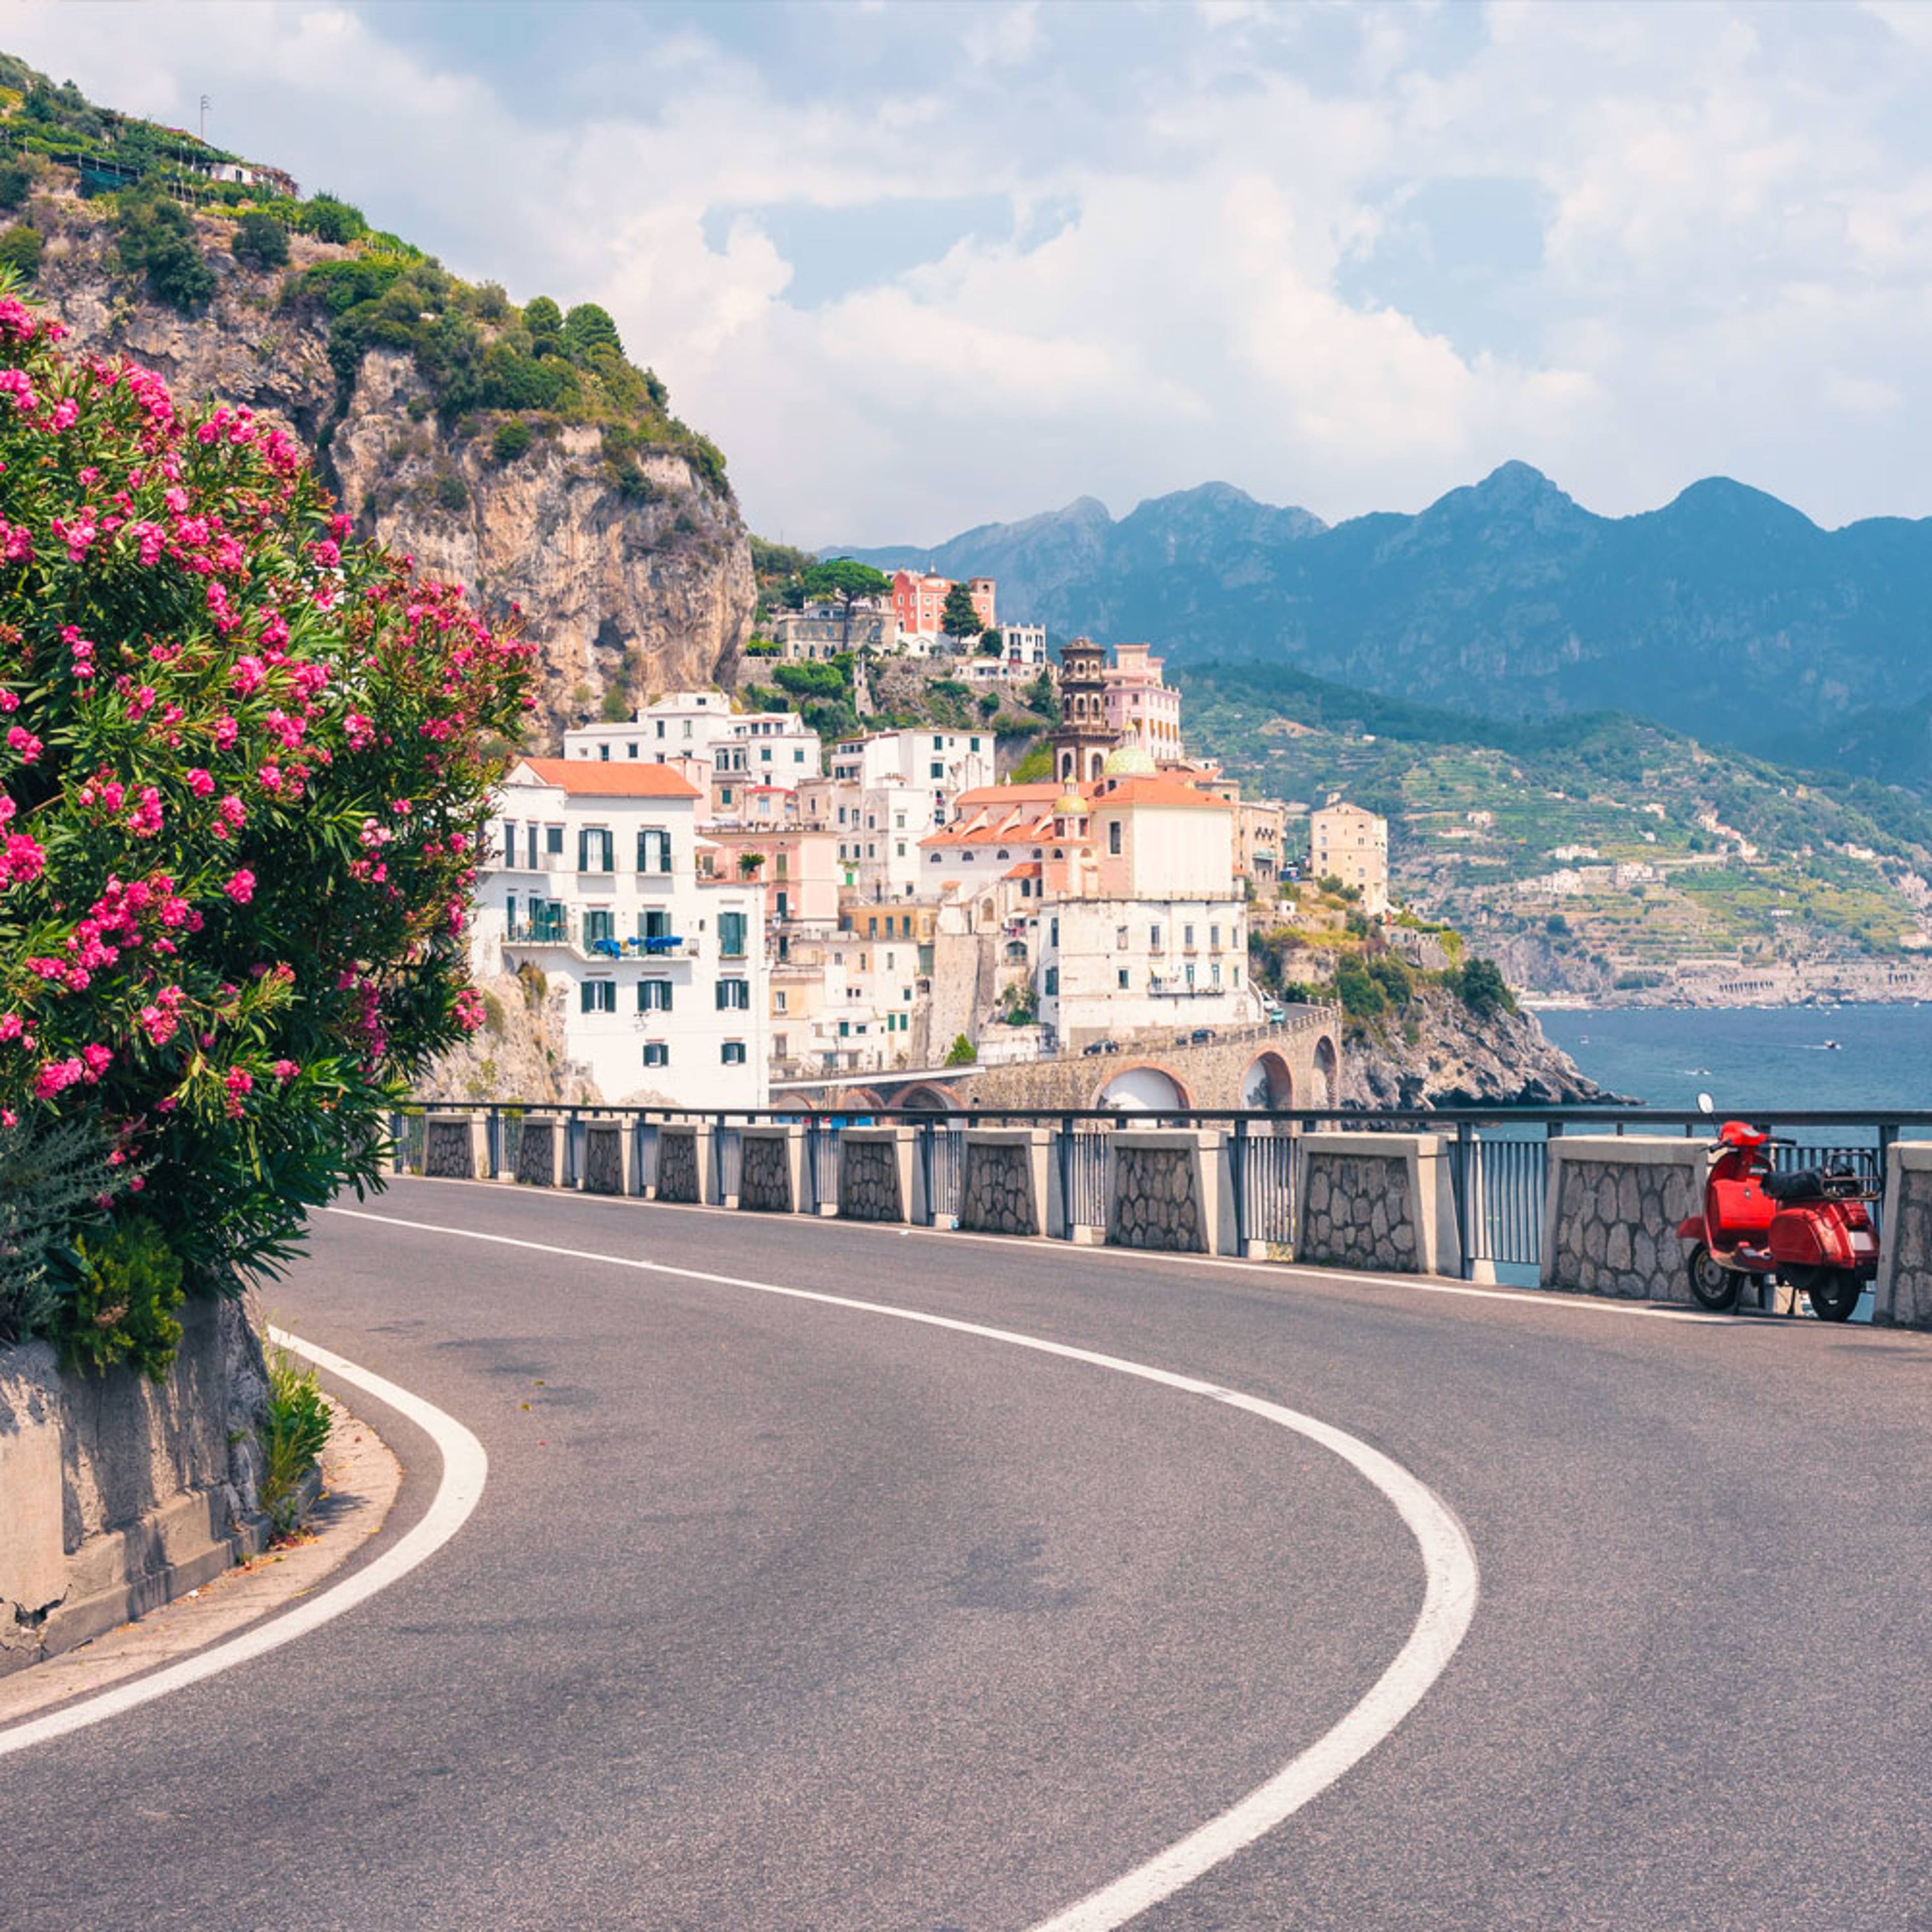 Design your perfect road trip with a local expert in Italy